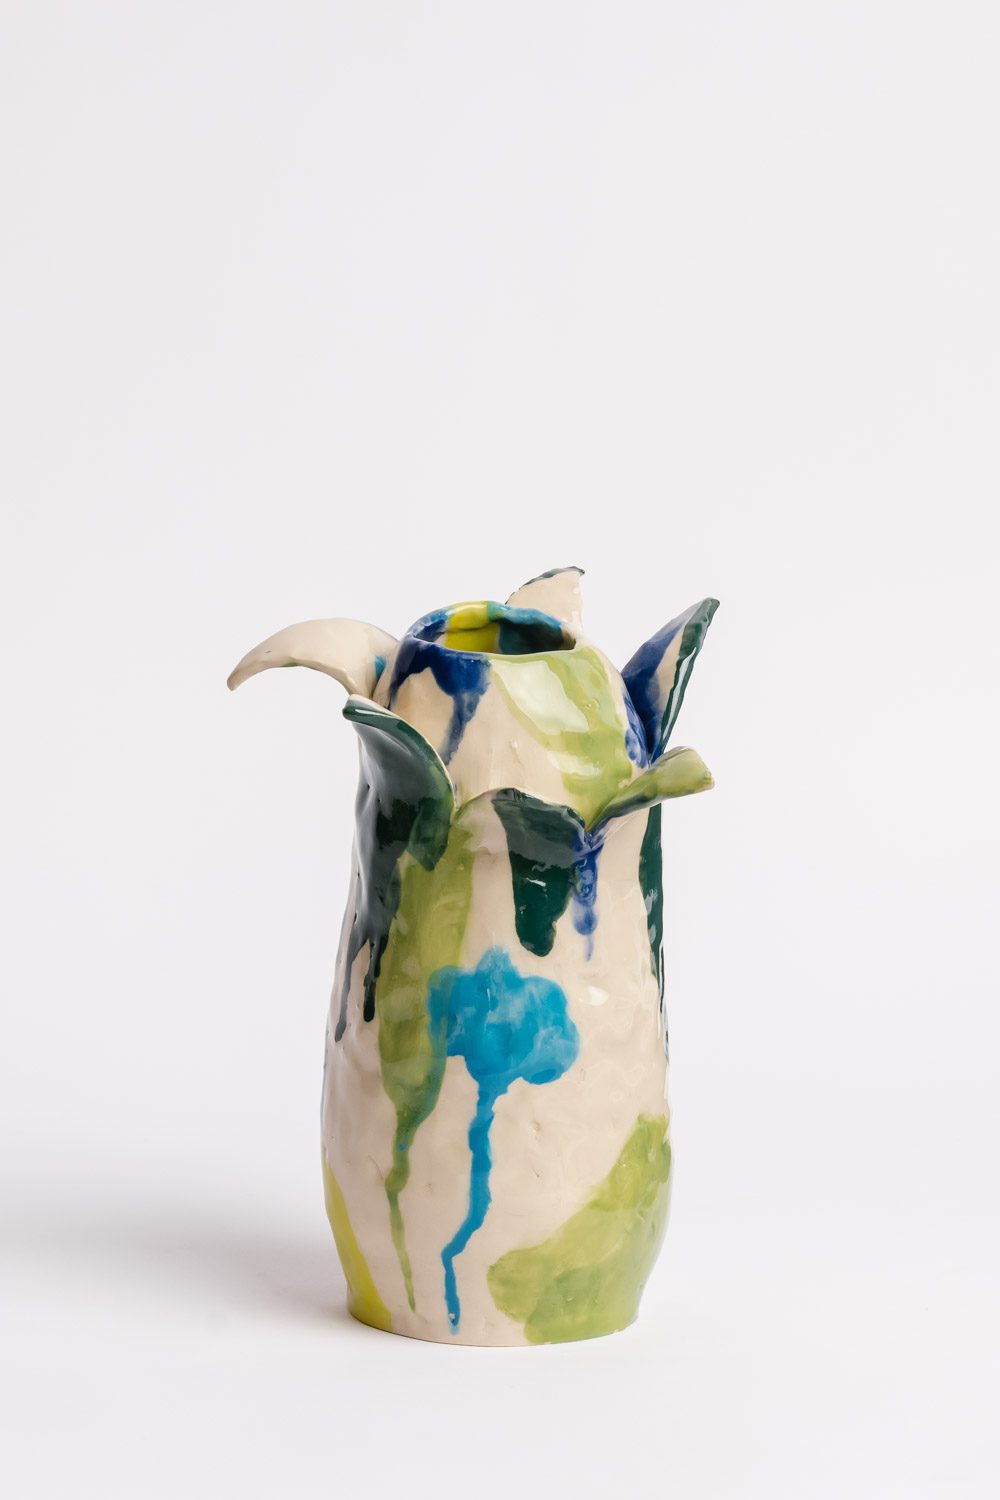 Small hand built ceramic vessel, by Susan Buret, photo by Samee Lapham